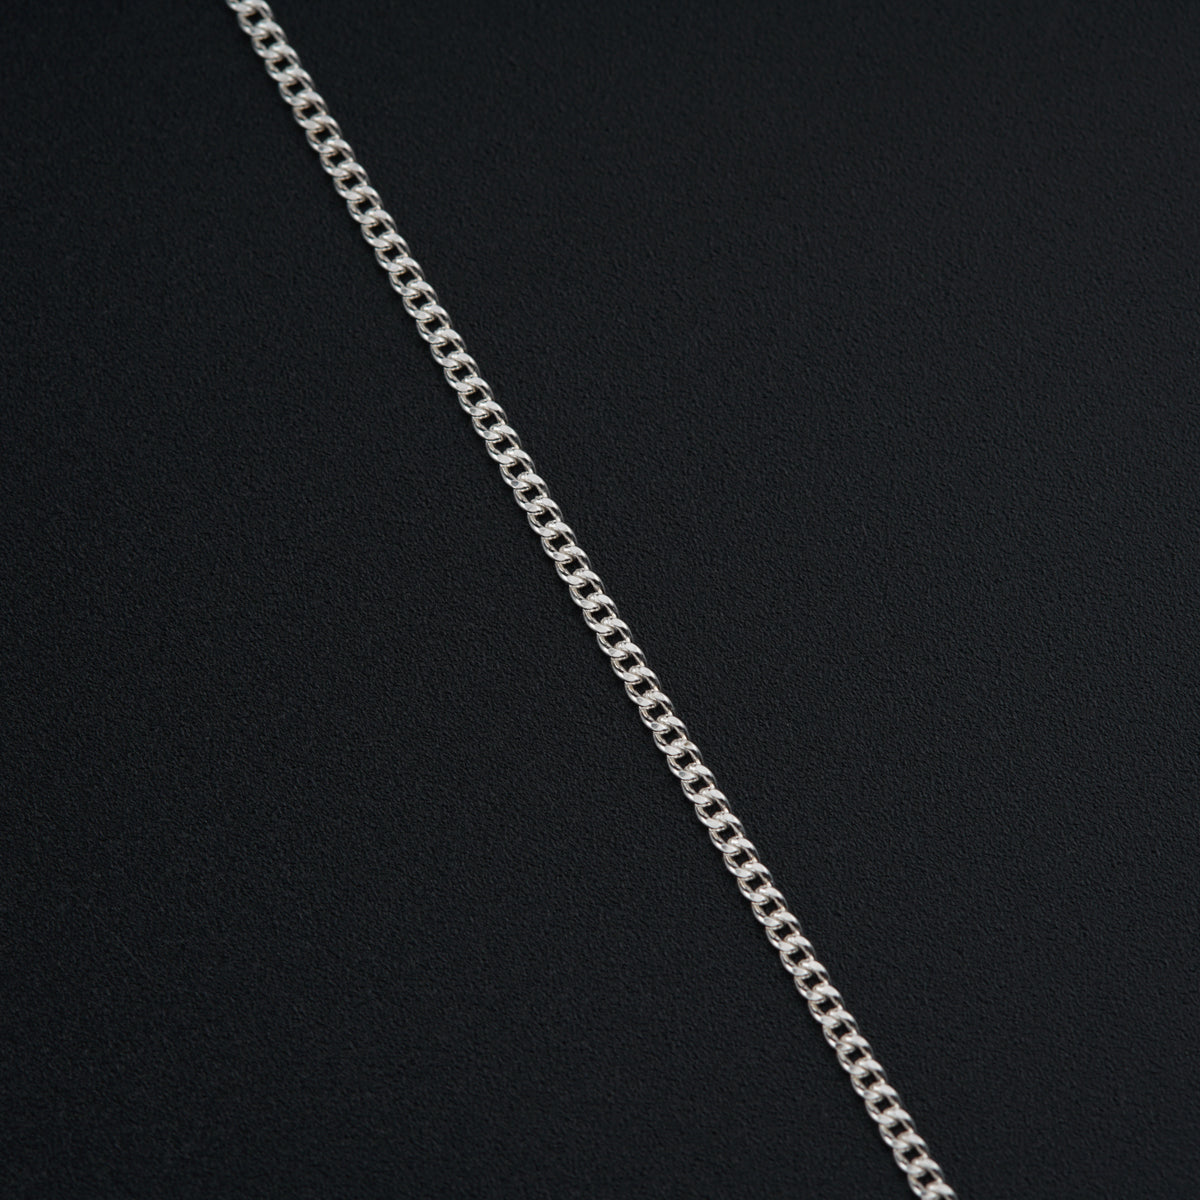 a silver chain is shown on a black surface